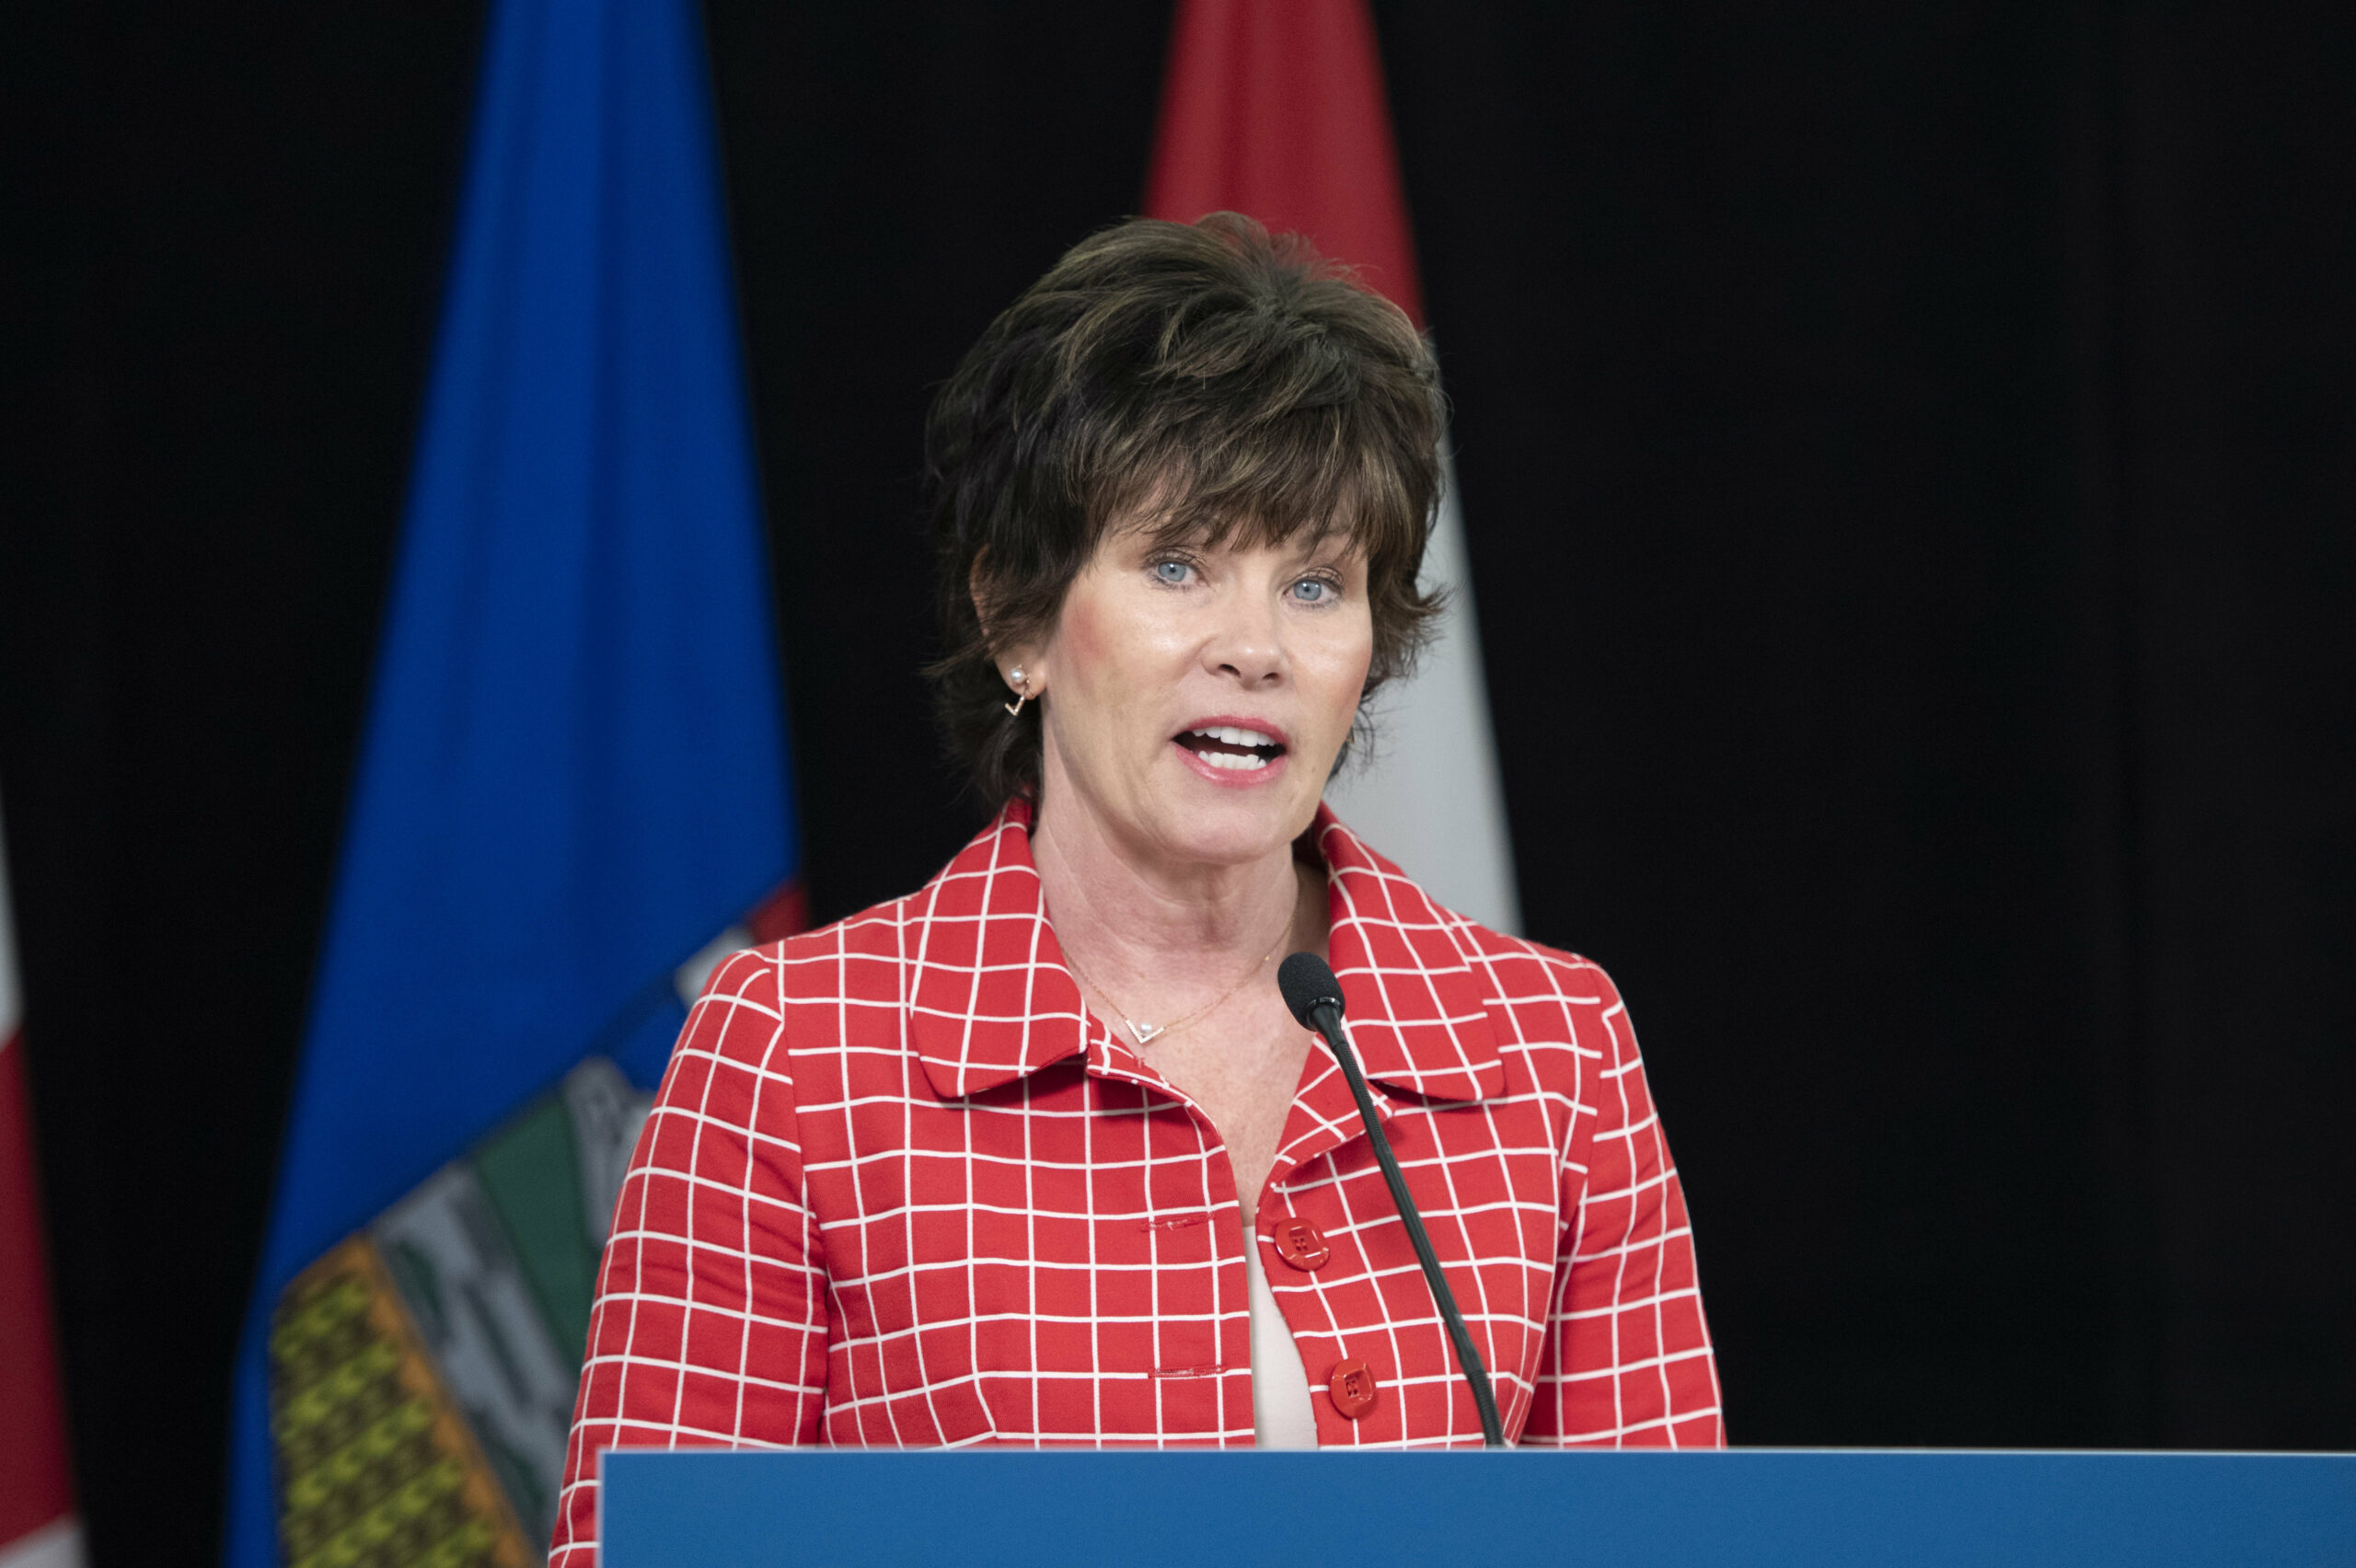 The ban on new coal mines in Alberta's Rockies was announced by Energy Minister Sonya Savage